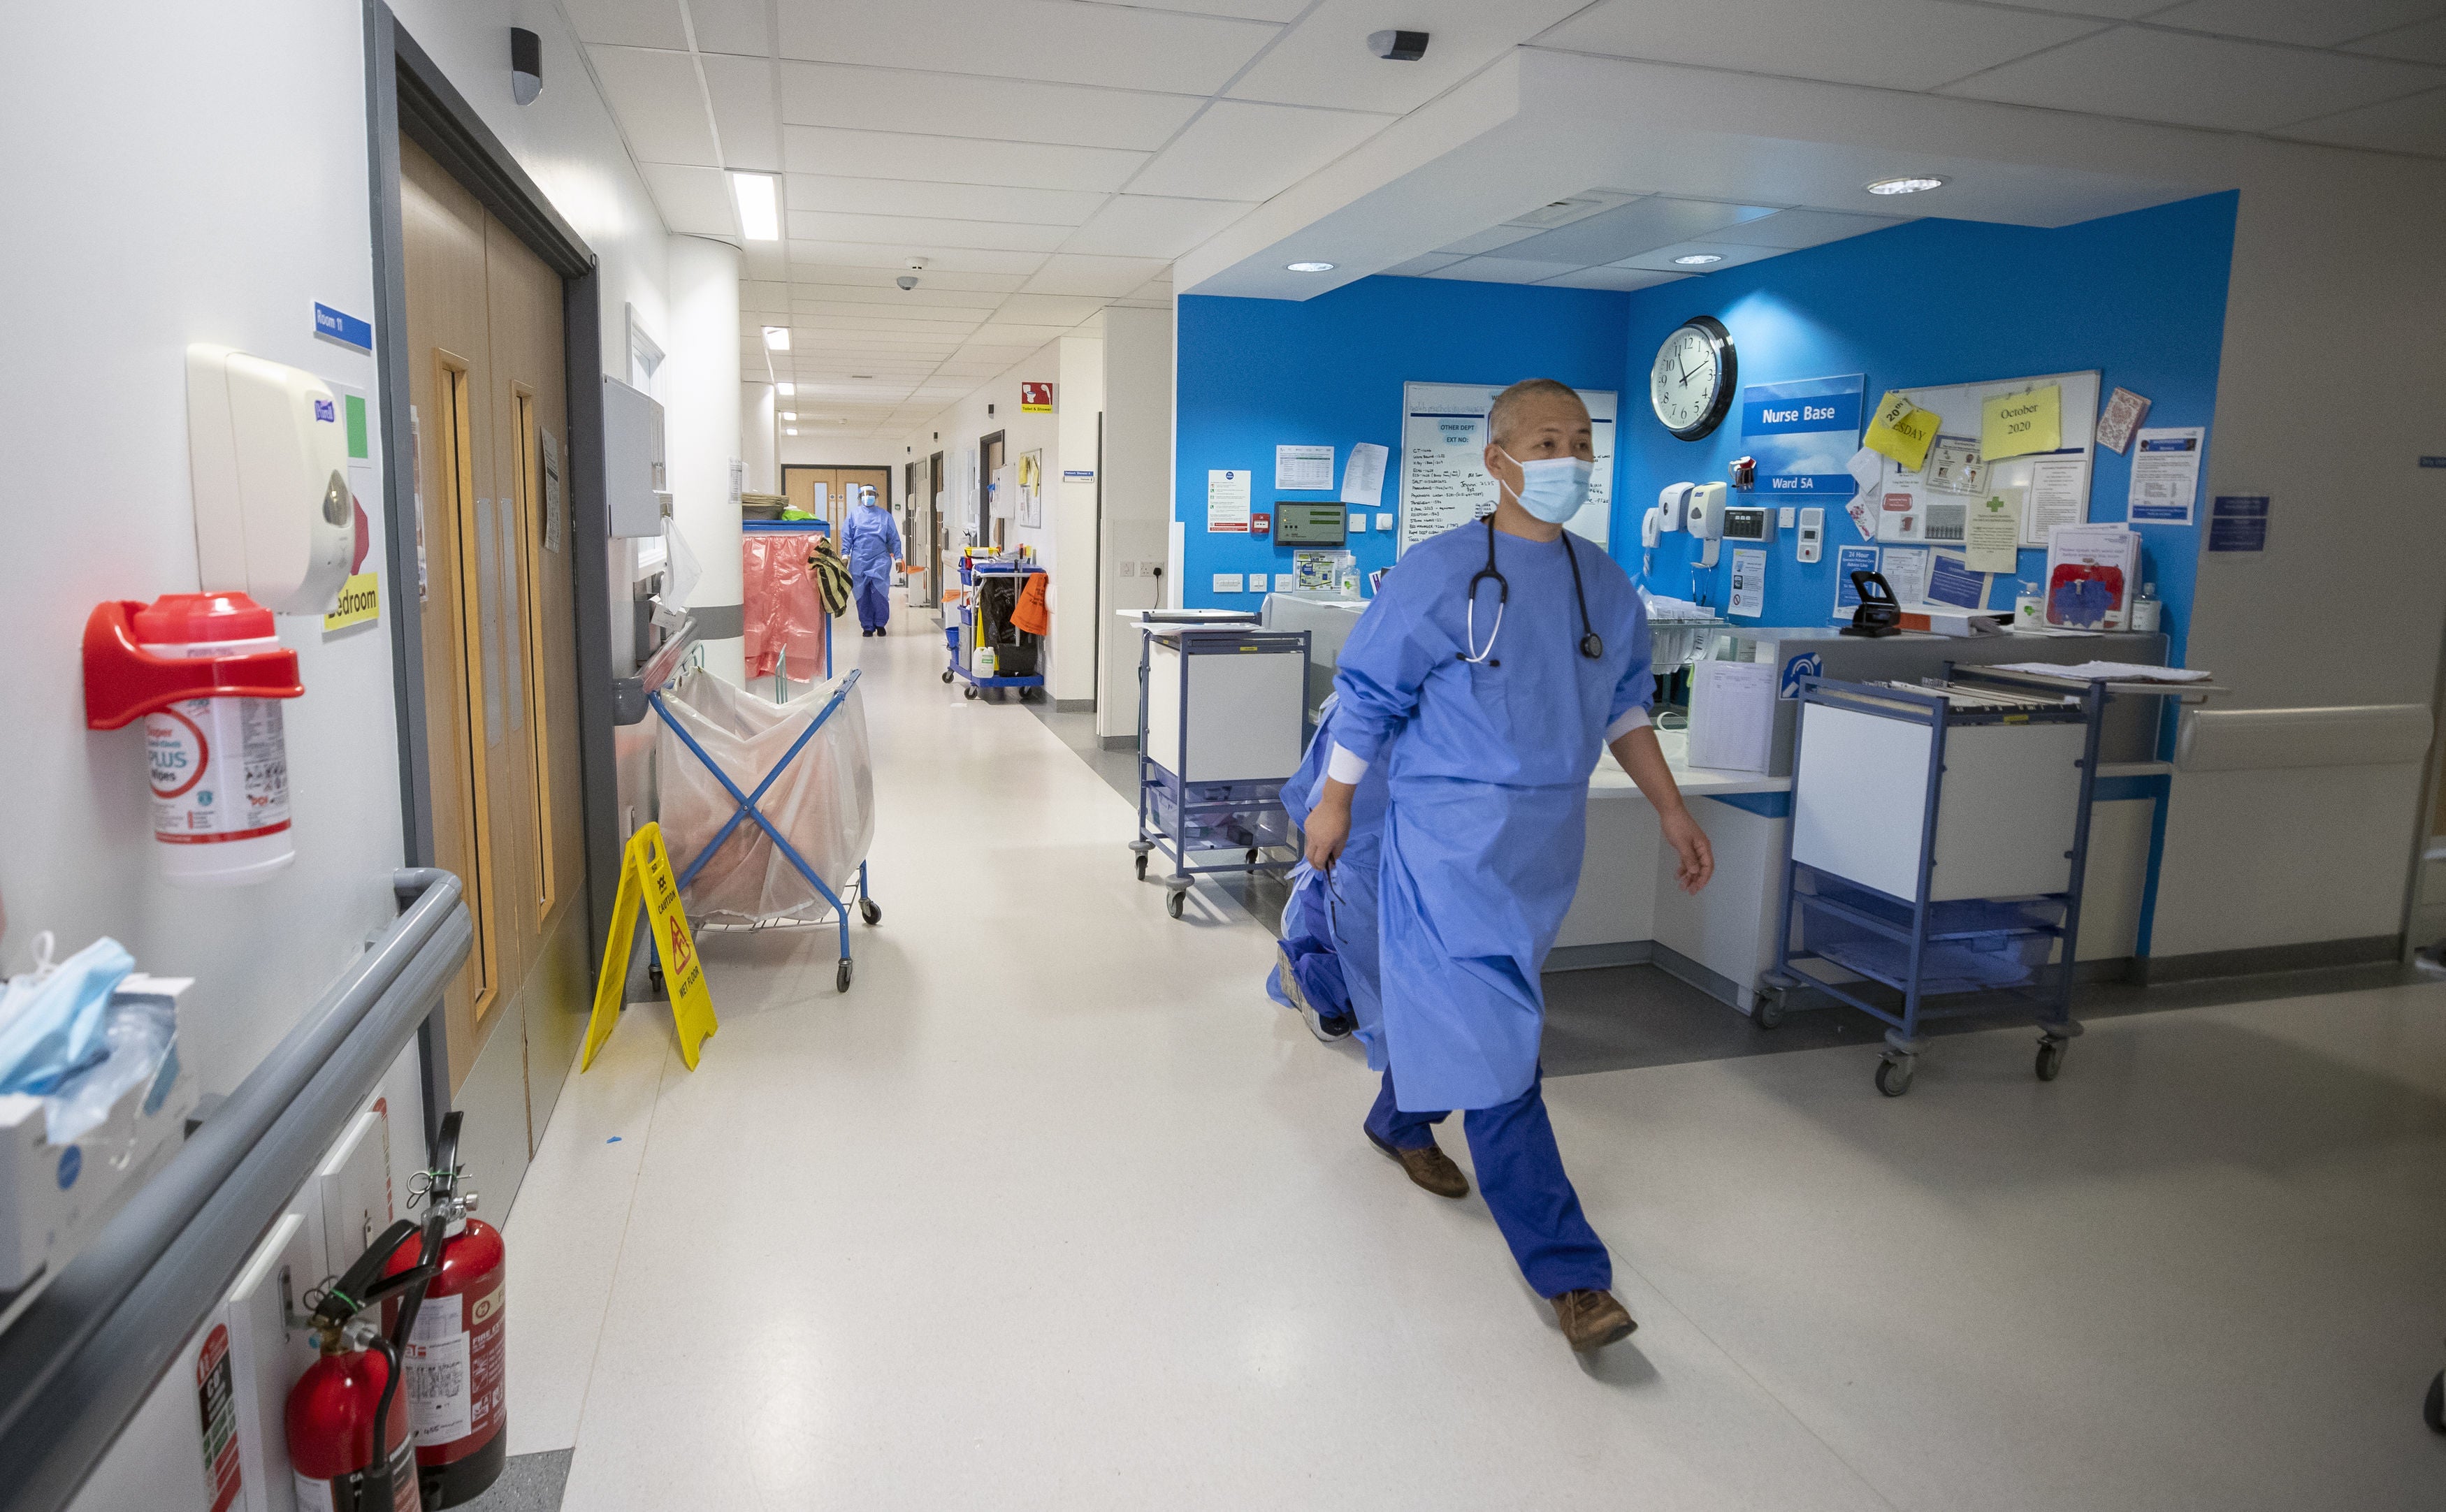 Increased hospital infections occurred despite better prevention measures and PPE